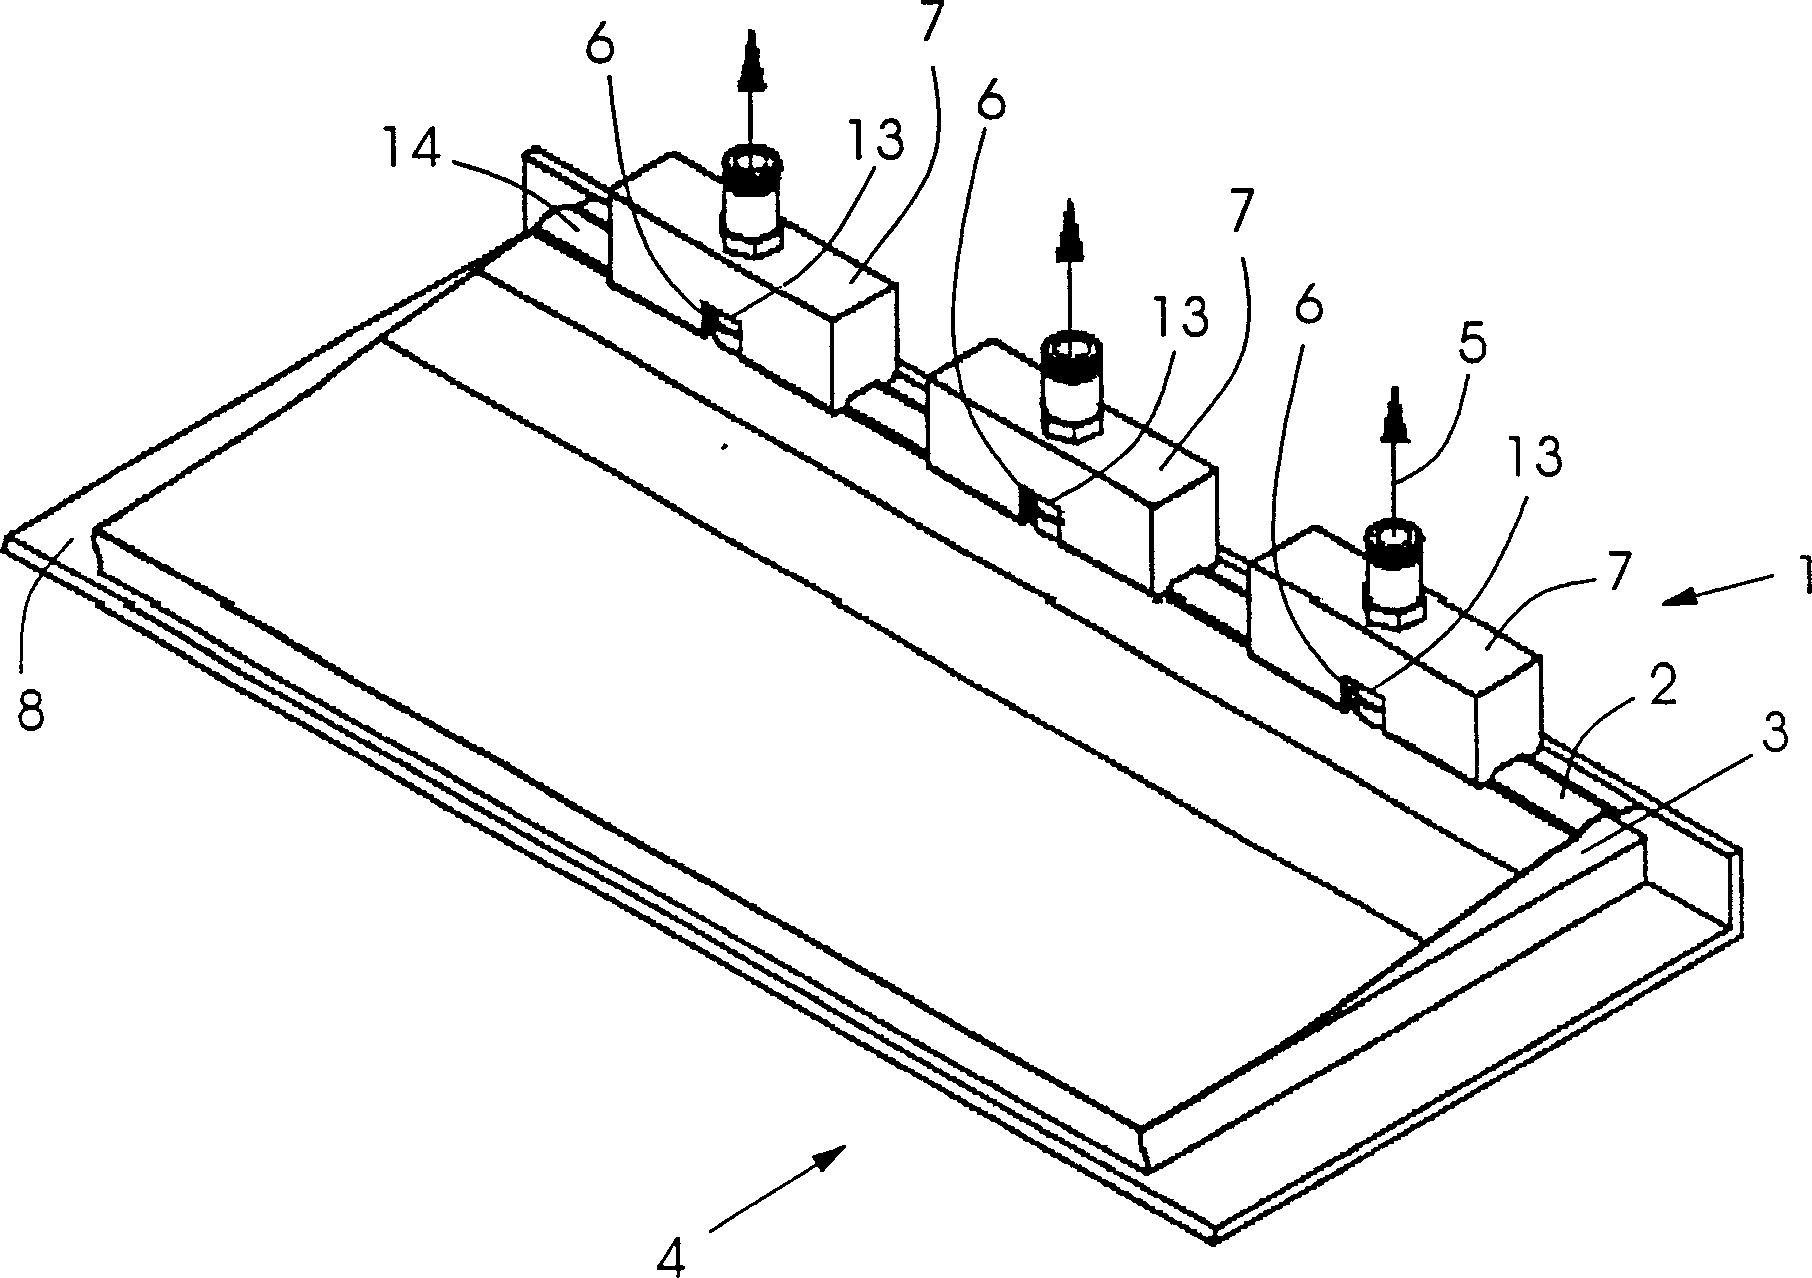 Apparatus and method for printing plate separating which with one stow